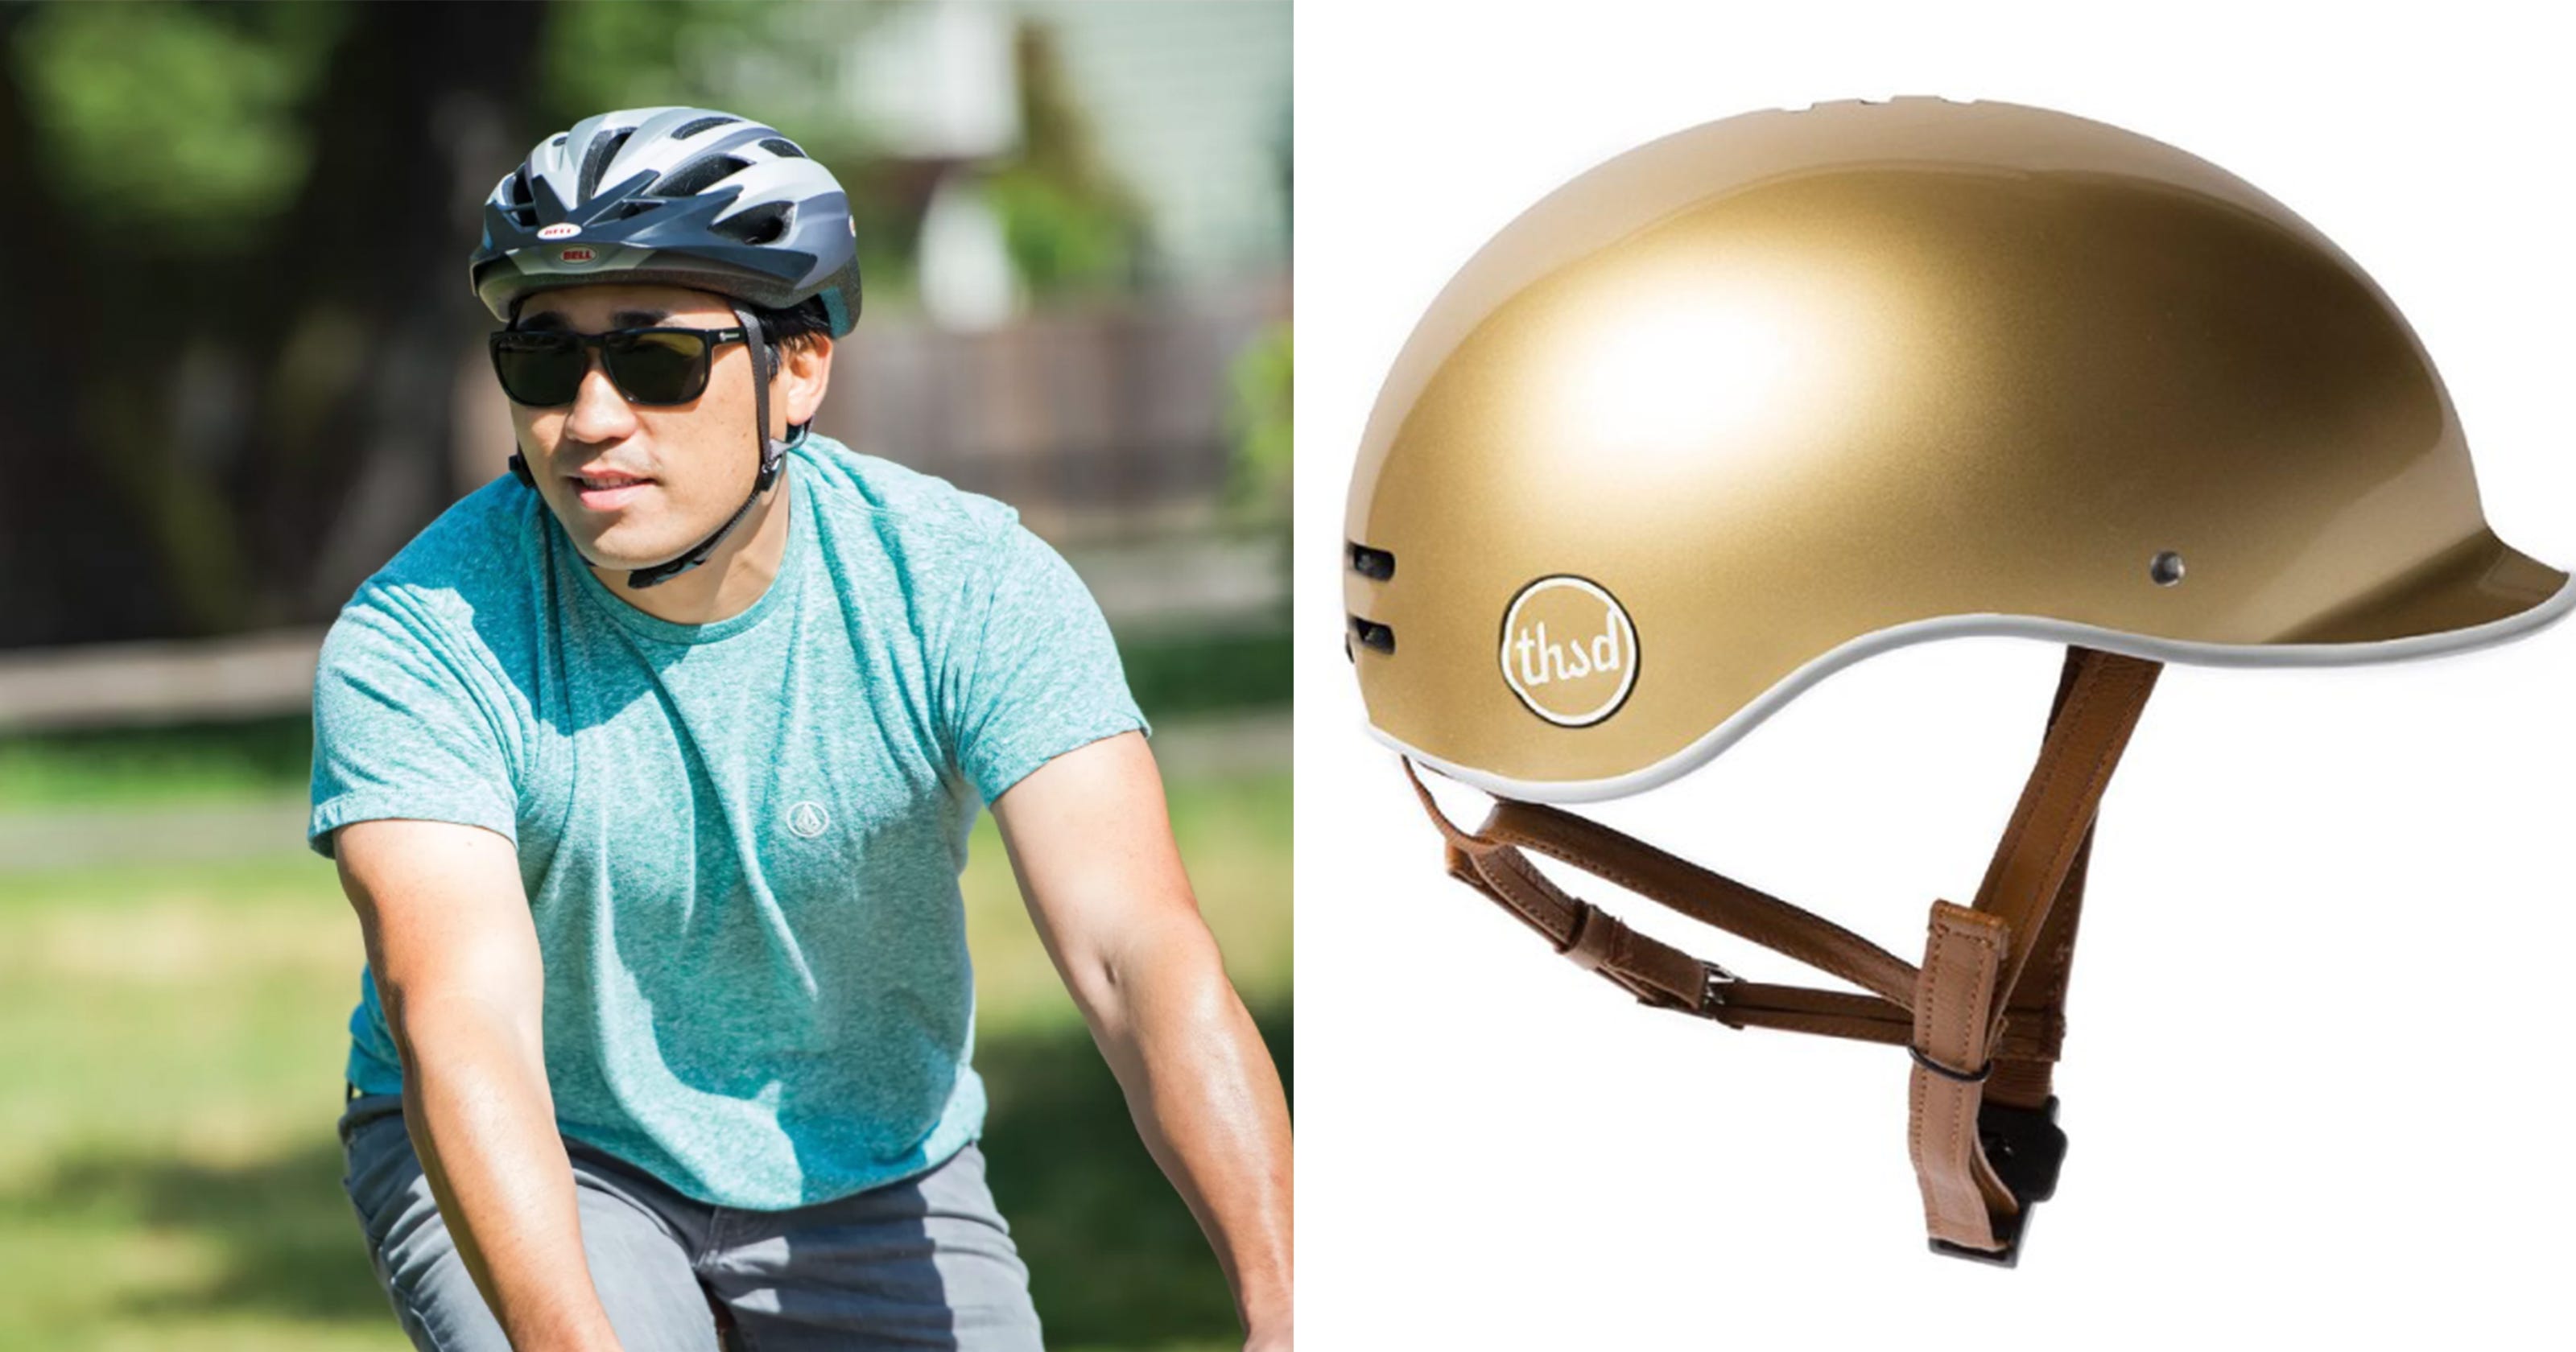 10 Great Bike Helmets To Get Right Now